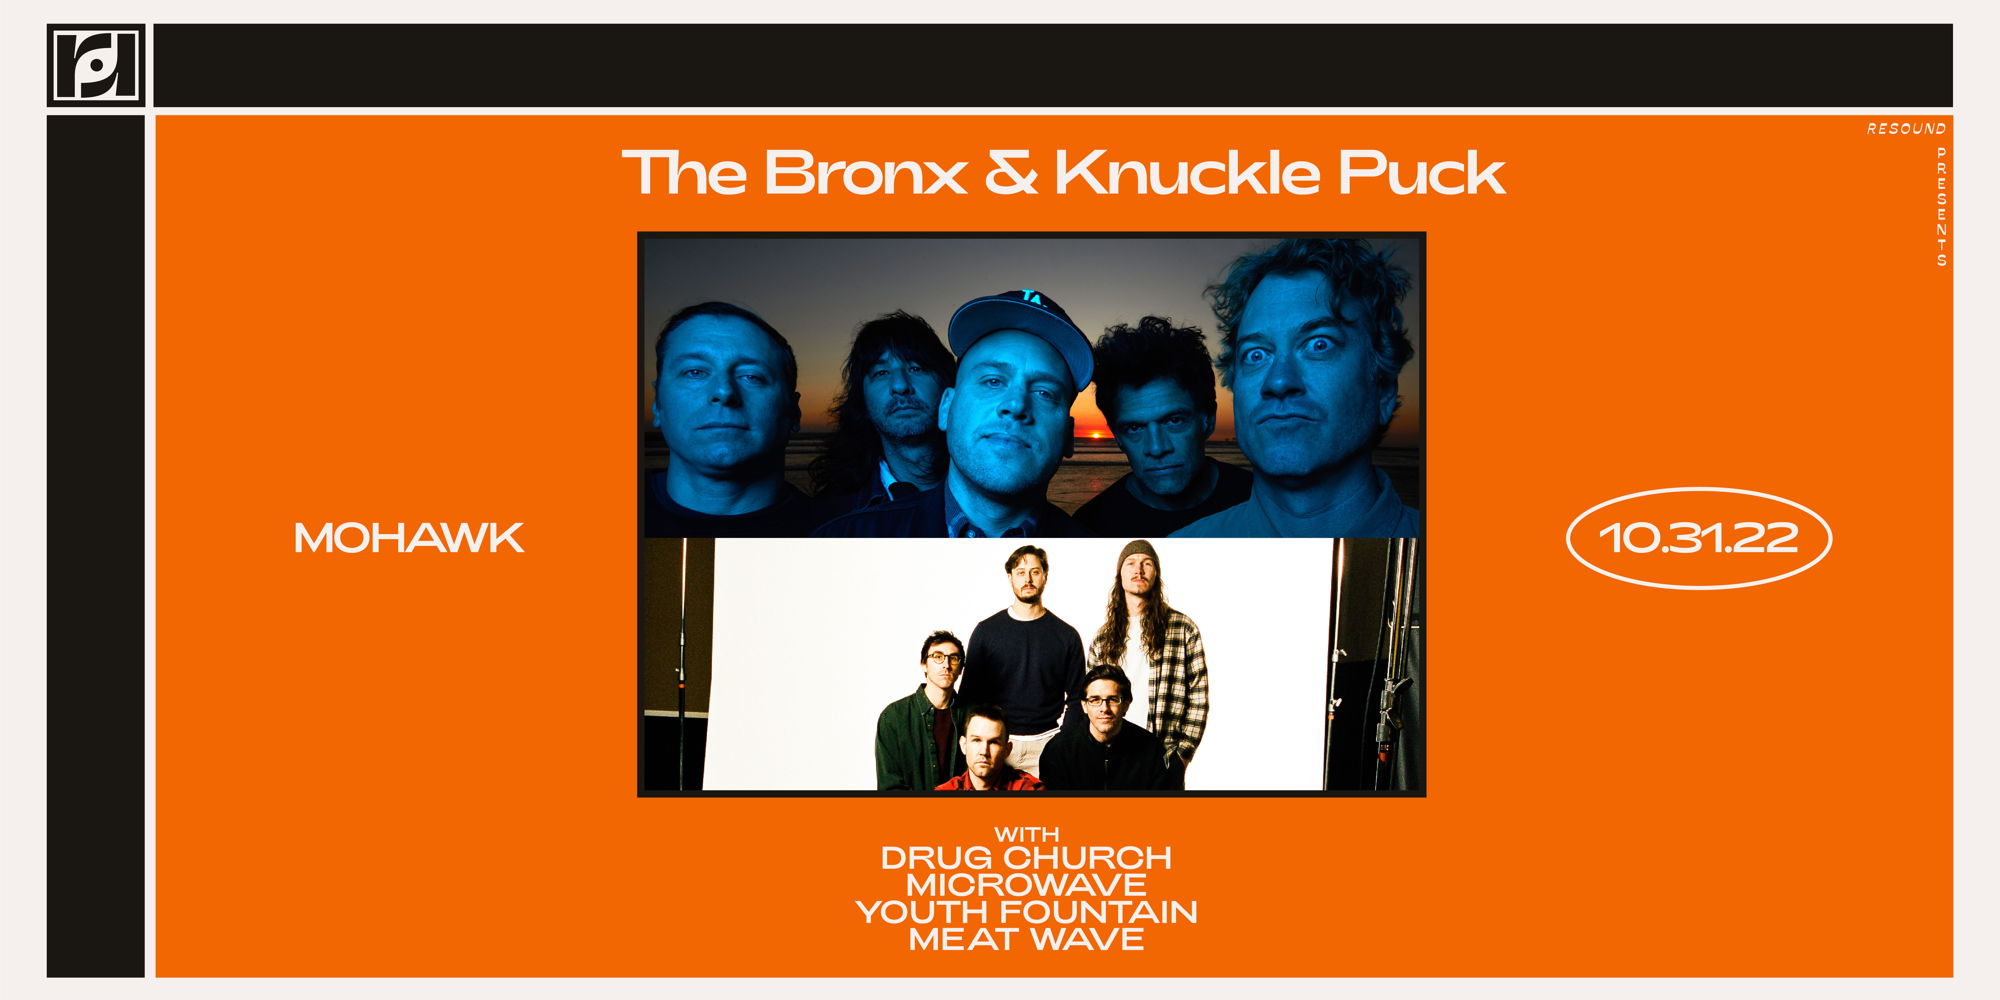 Halloween Banger: The Bronx and Knuckle Puck w/ Drug Church, Microwave, Youth Fountain and Meat Wave promotional image